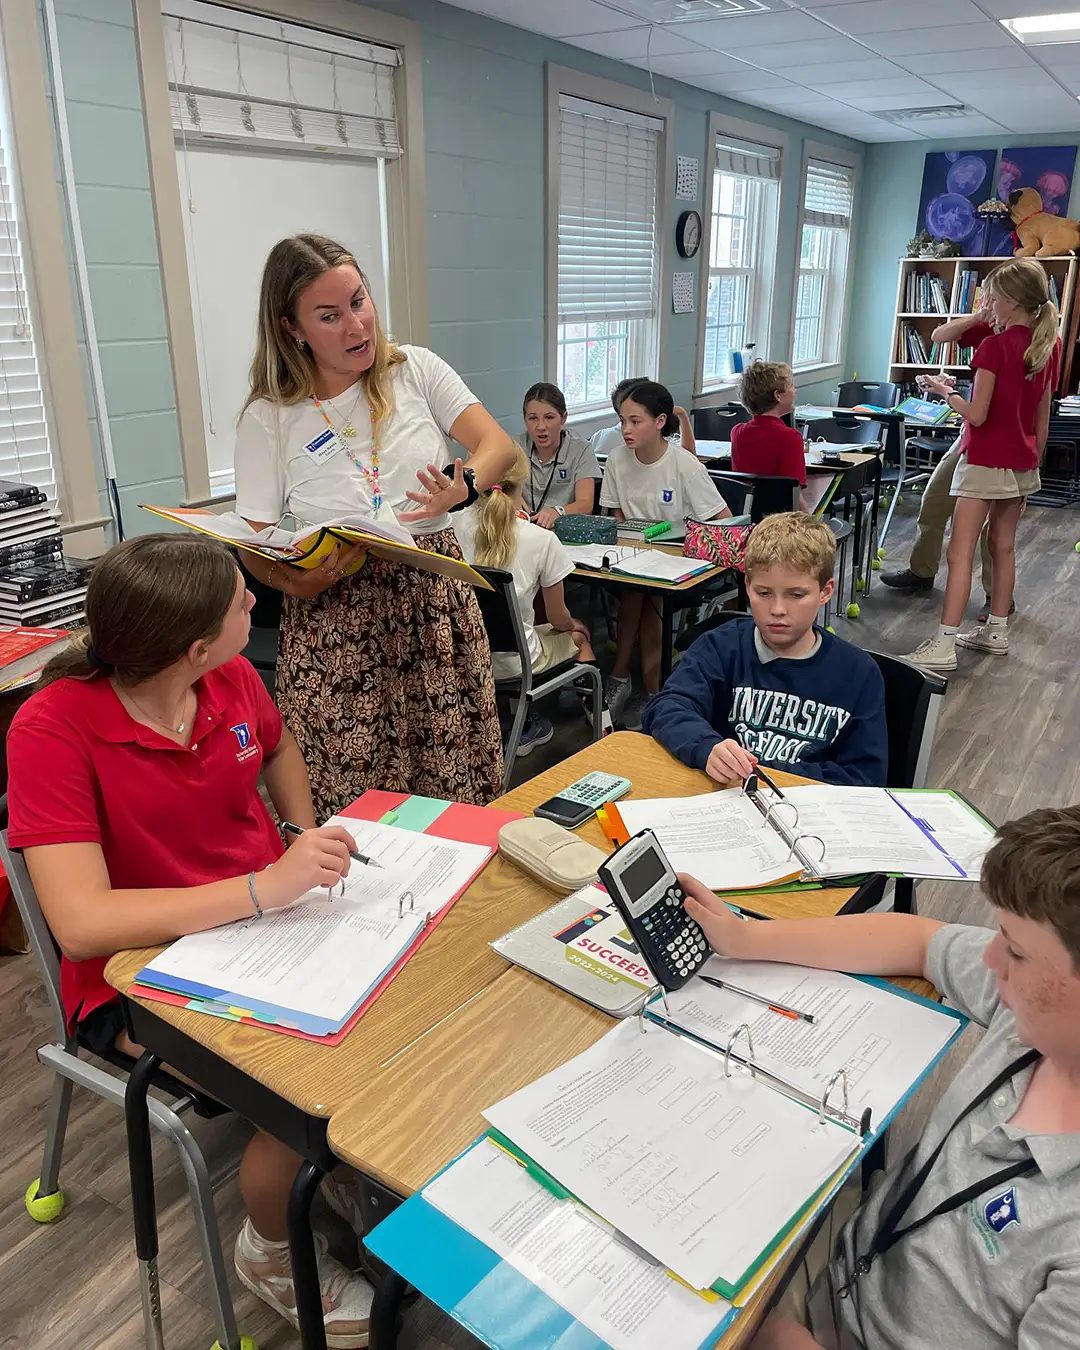 In a classroom setting, a teacher stands over a student, explaining a concept, while other students surround them. Students work in small groups in the background.